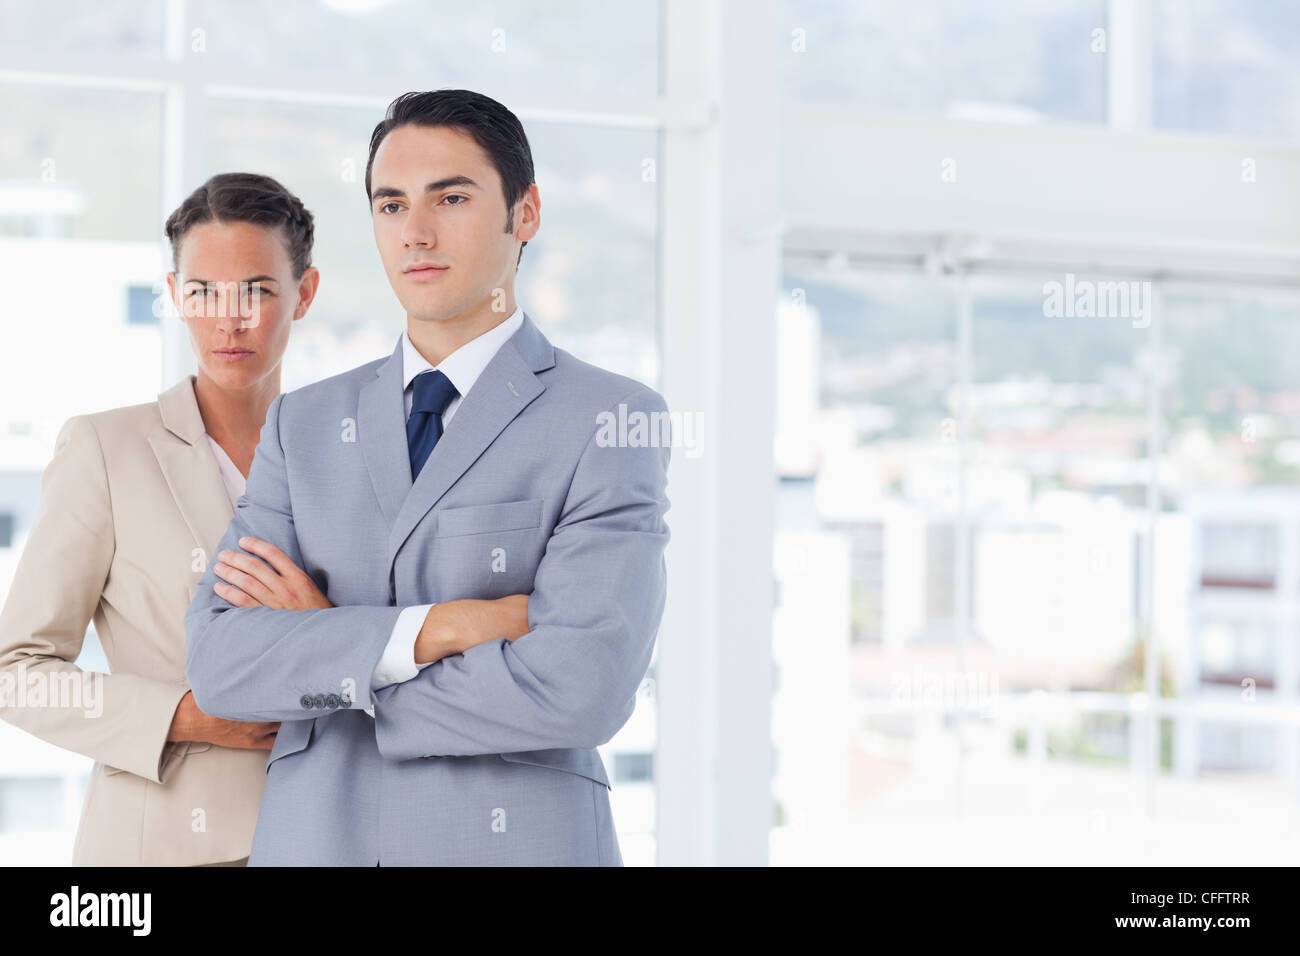 Confident businesspeople with arms crossed Stock Photo